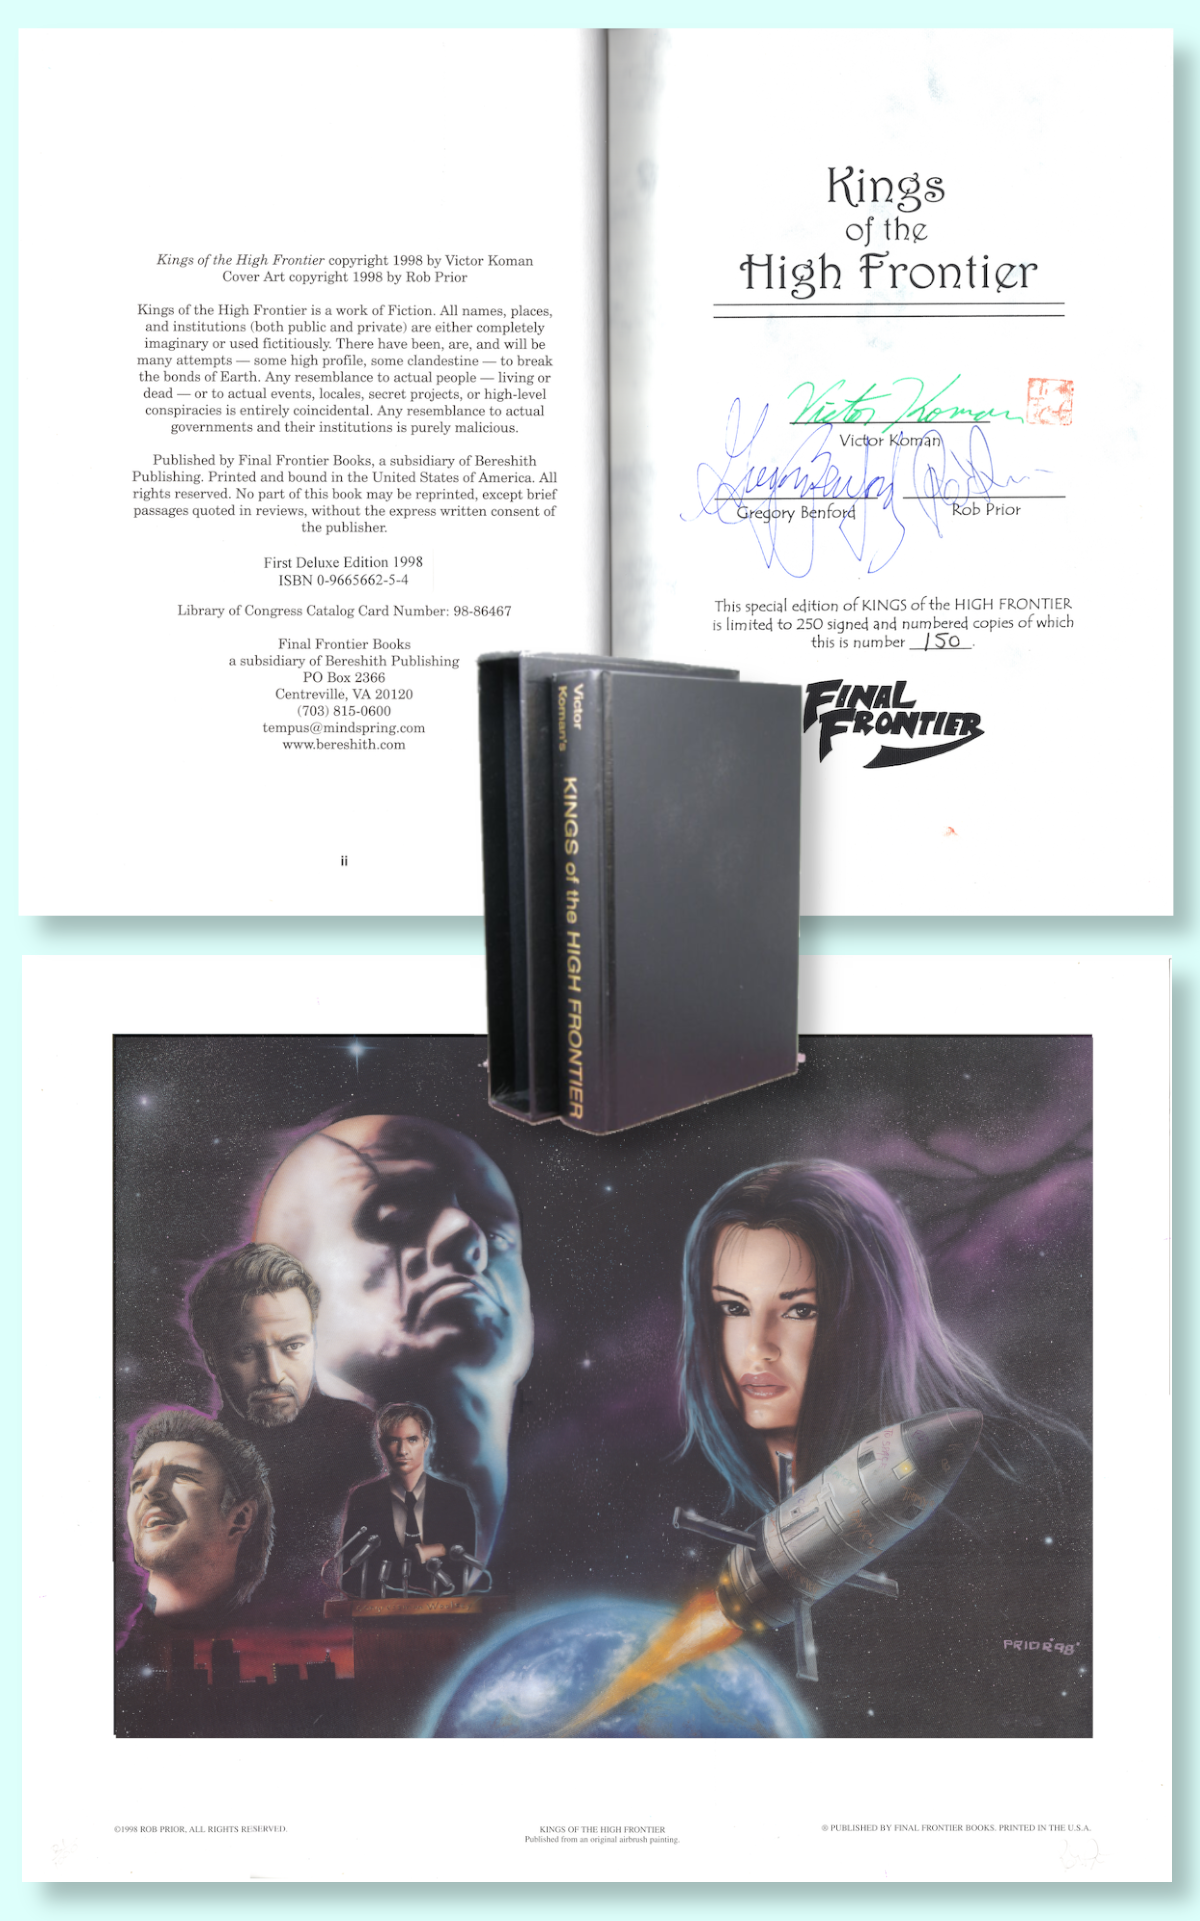 Combo image of Kings of the High Frontier Deluxe Edition slipcased book, autograph page, and Rob Prior cover art print.